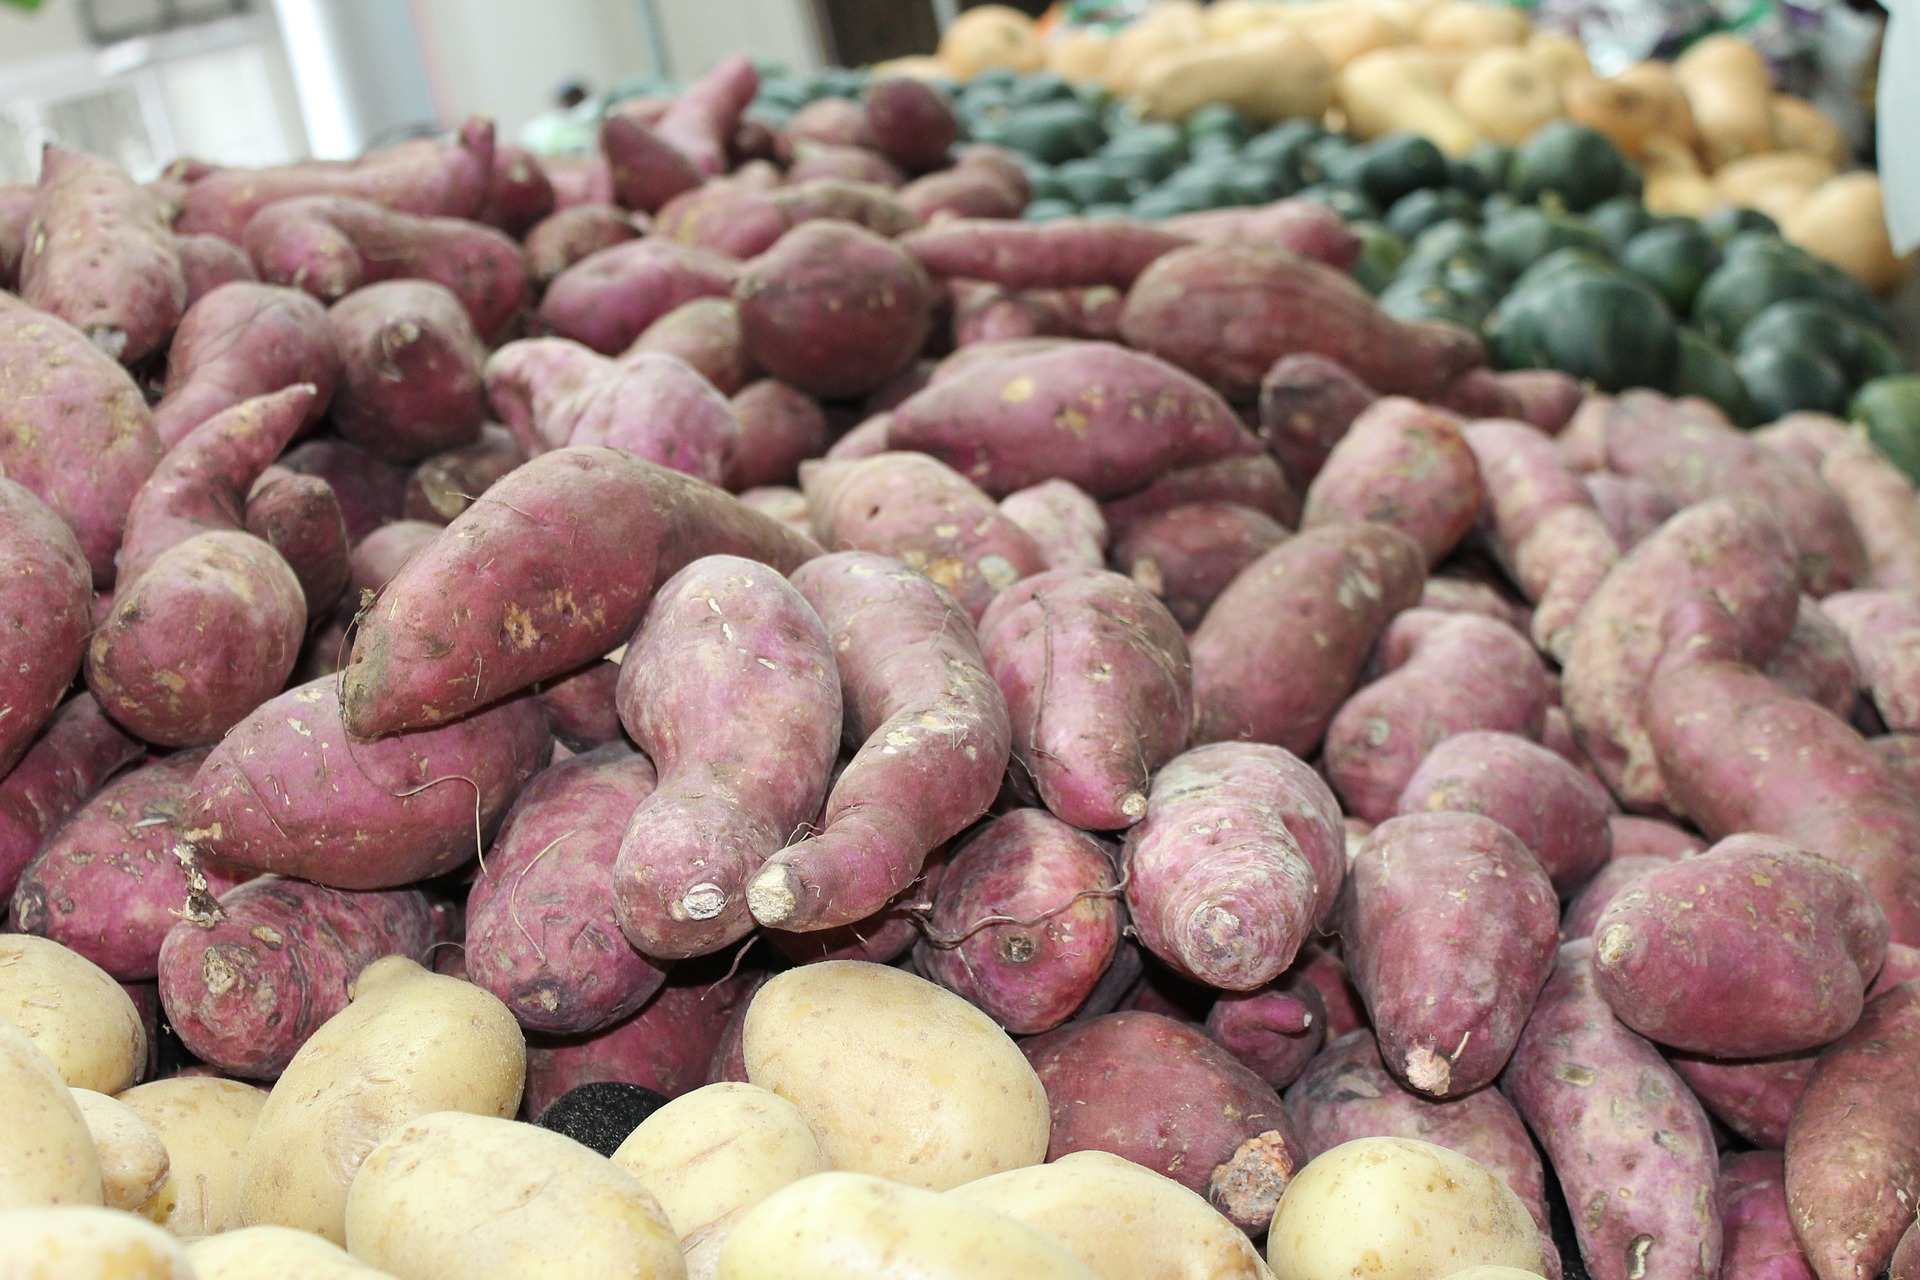 How Many Sweet Potatoes Does One Plant Produce?